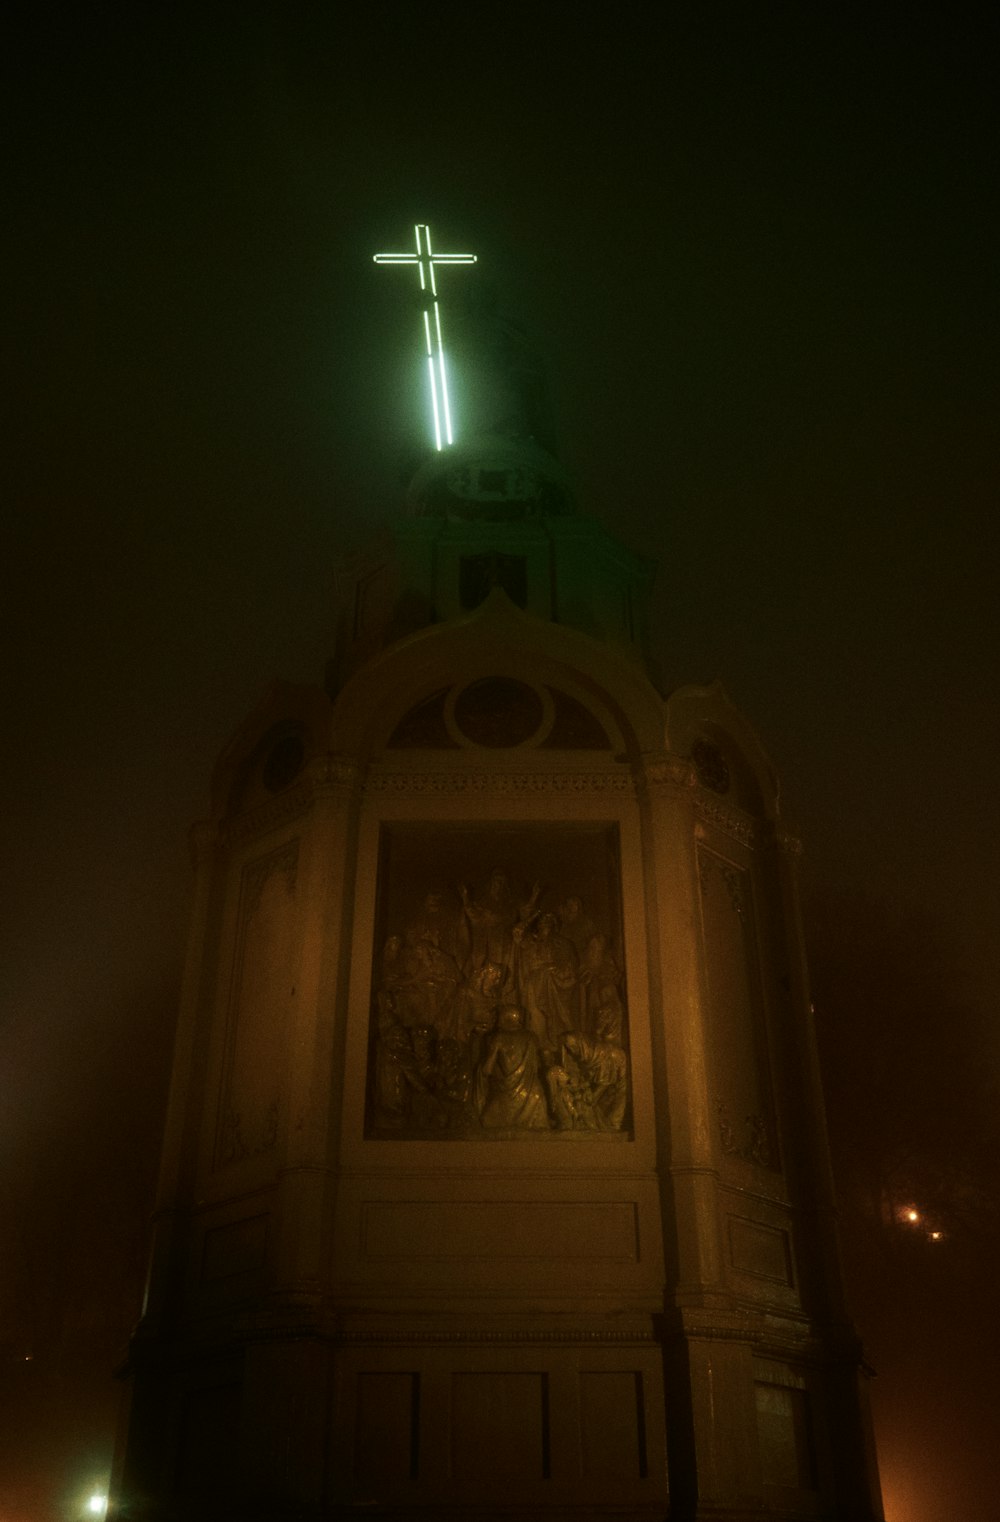 a cross on top of a building lit up at night